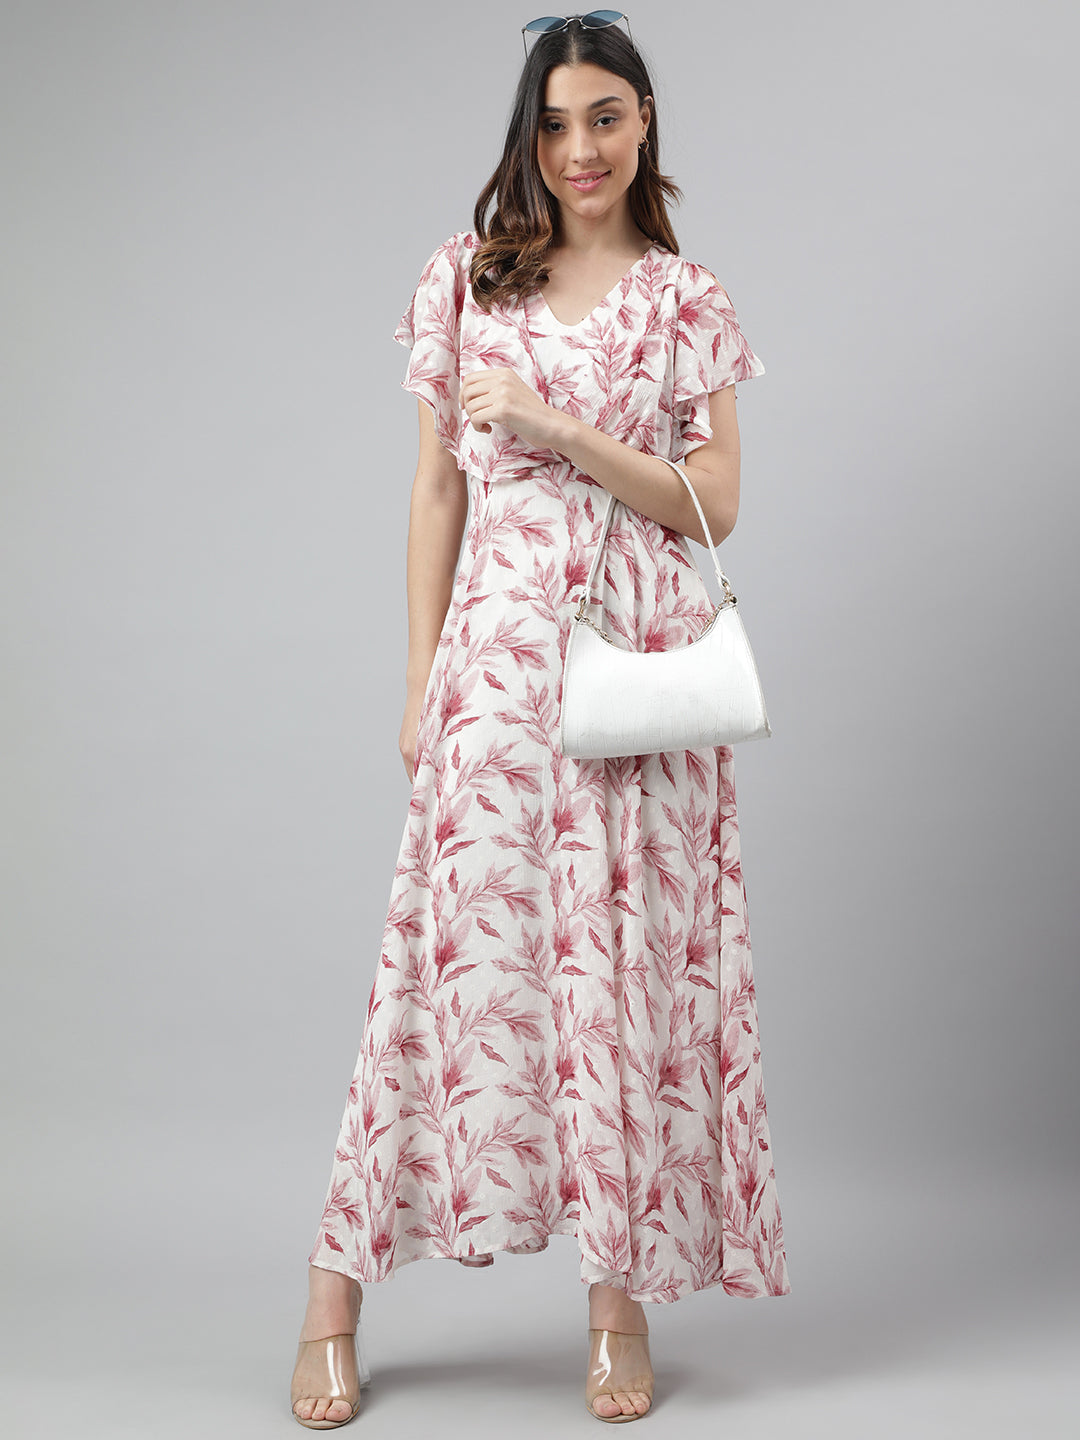 Maroon Cap Sleeve V-Neck Floral Print Women Maxi Dress for Casual